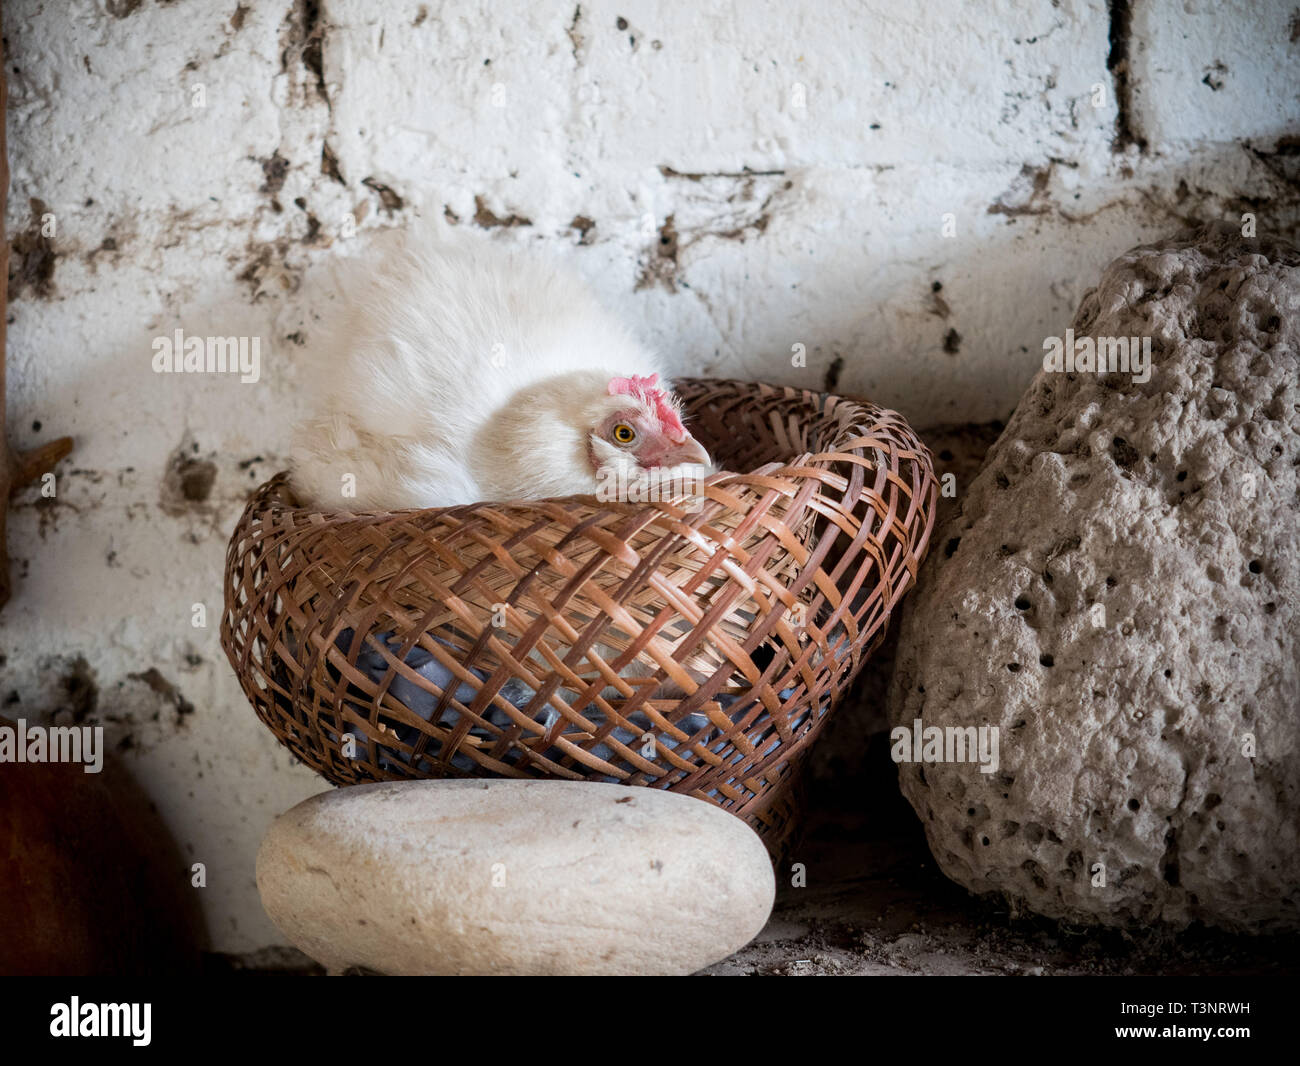 February 9, 2019 - Finca El ParaÃ-So/Yopal, Casanare, Colombia - A hen seen at the El ParaÃ-so farm.Colombian cowboys taking care of the cows in the region of Casanare, eastern Colombia, between the Ands, the Orinoco River and the border with Venezuela. These are Plains and pastures with wide rivers and marshes, a region of big biodiversity. But nowadays, it is in danger because of climate change. Credit: Jana Cavojska/SOPA Images/ZUMA Wire/Alamy Live News Stock Photo